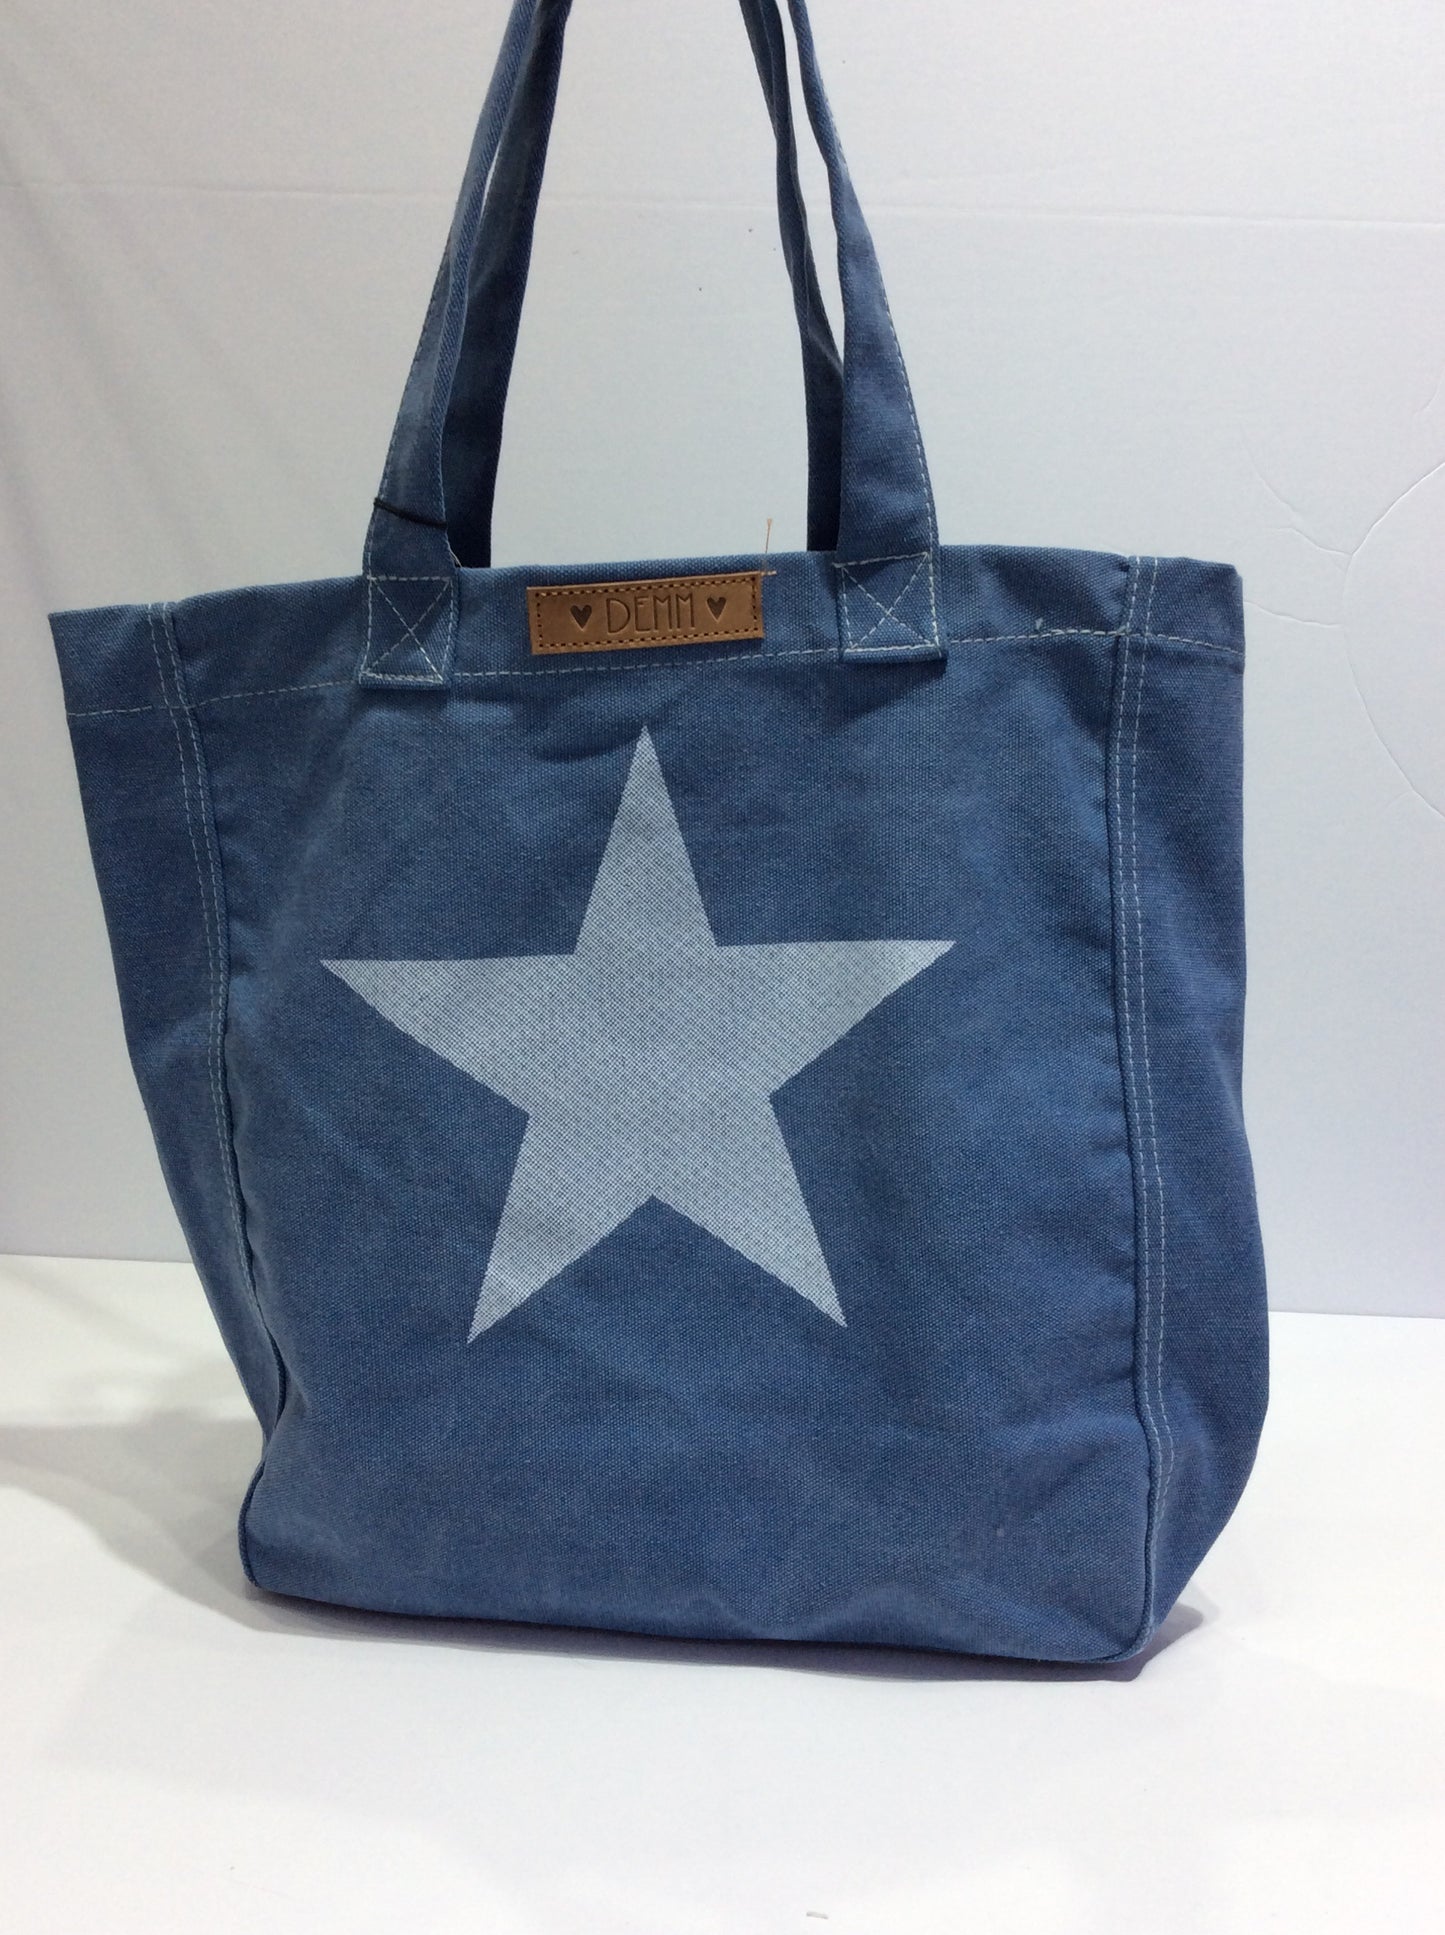 Bag-canvas bag for toting, lot's of room, very durable